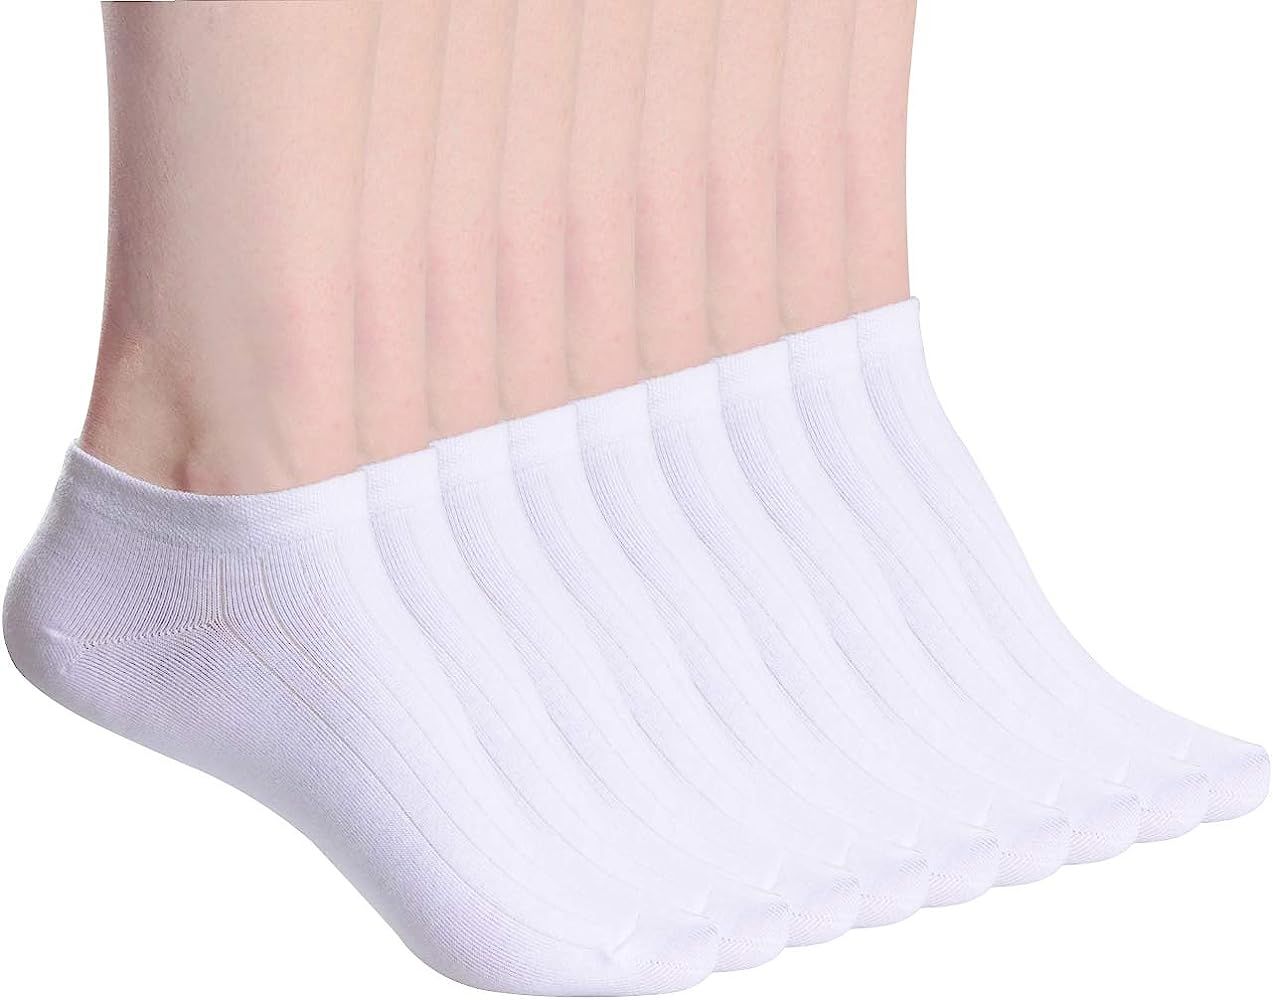 Women's Low Cut Socks,3-15 Pair Ankle No Show Athletic Short Cotton Socks by Sioncy | Amazon (US)